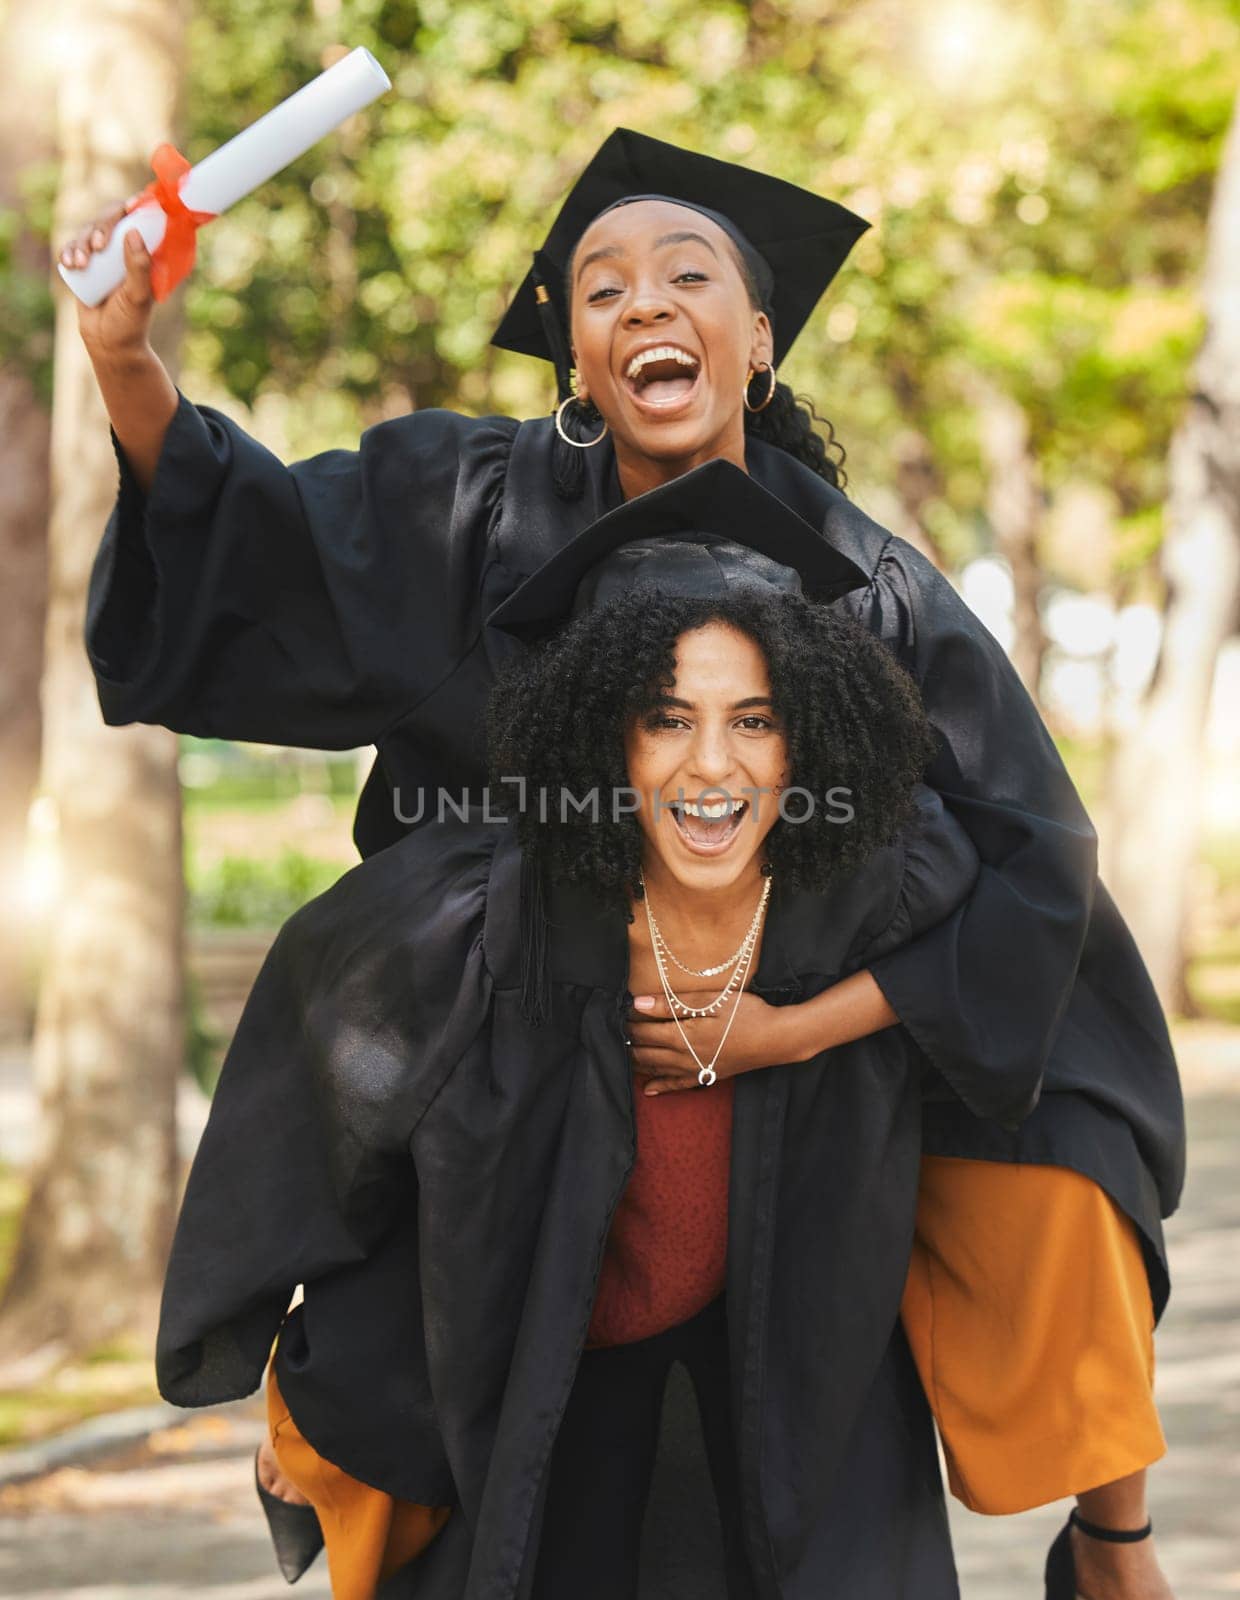 Graduation, women or friends and excited for celebration outdoor in nature for education and knowledge. Happiness, university student and people with certificate or diploma for achievement or success.